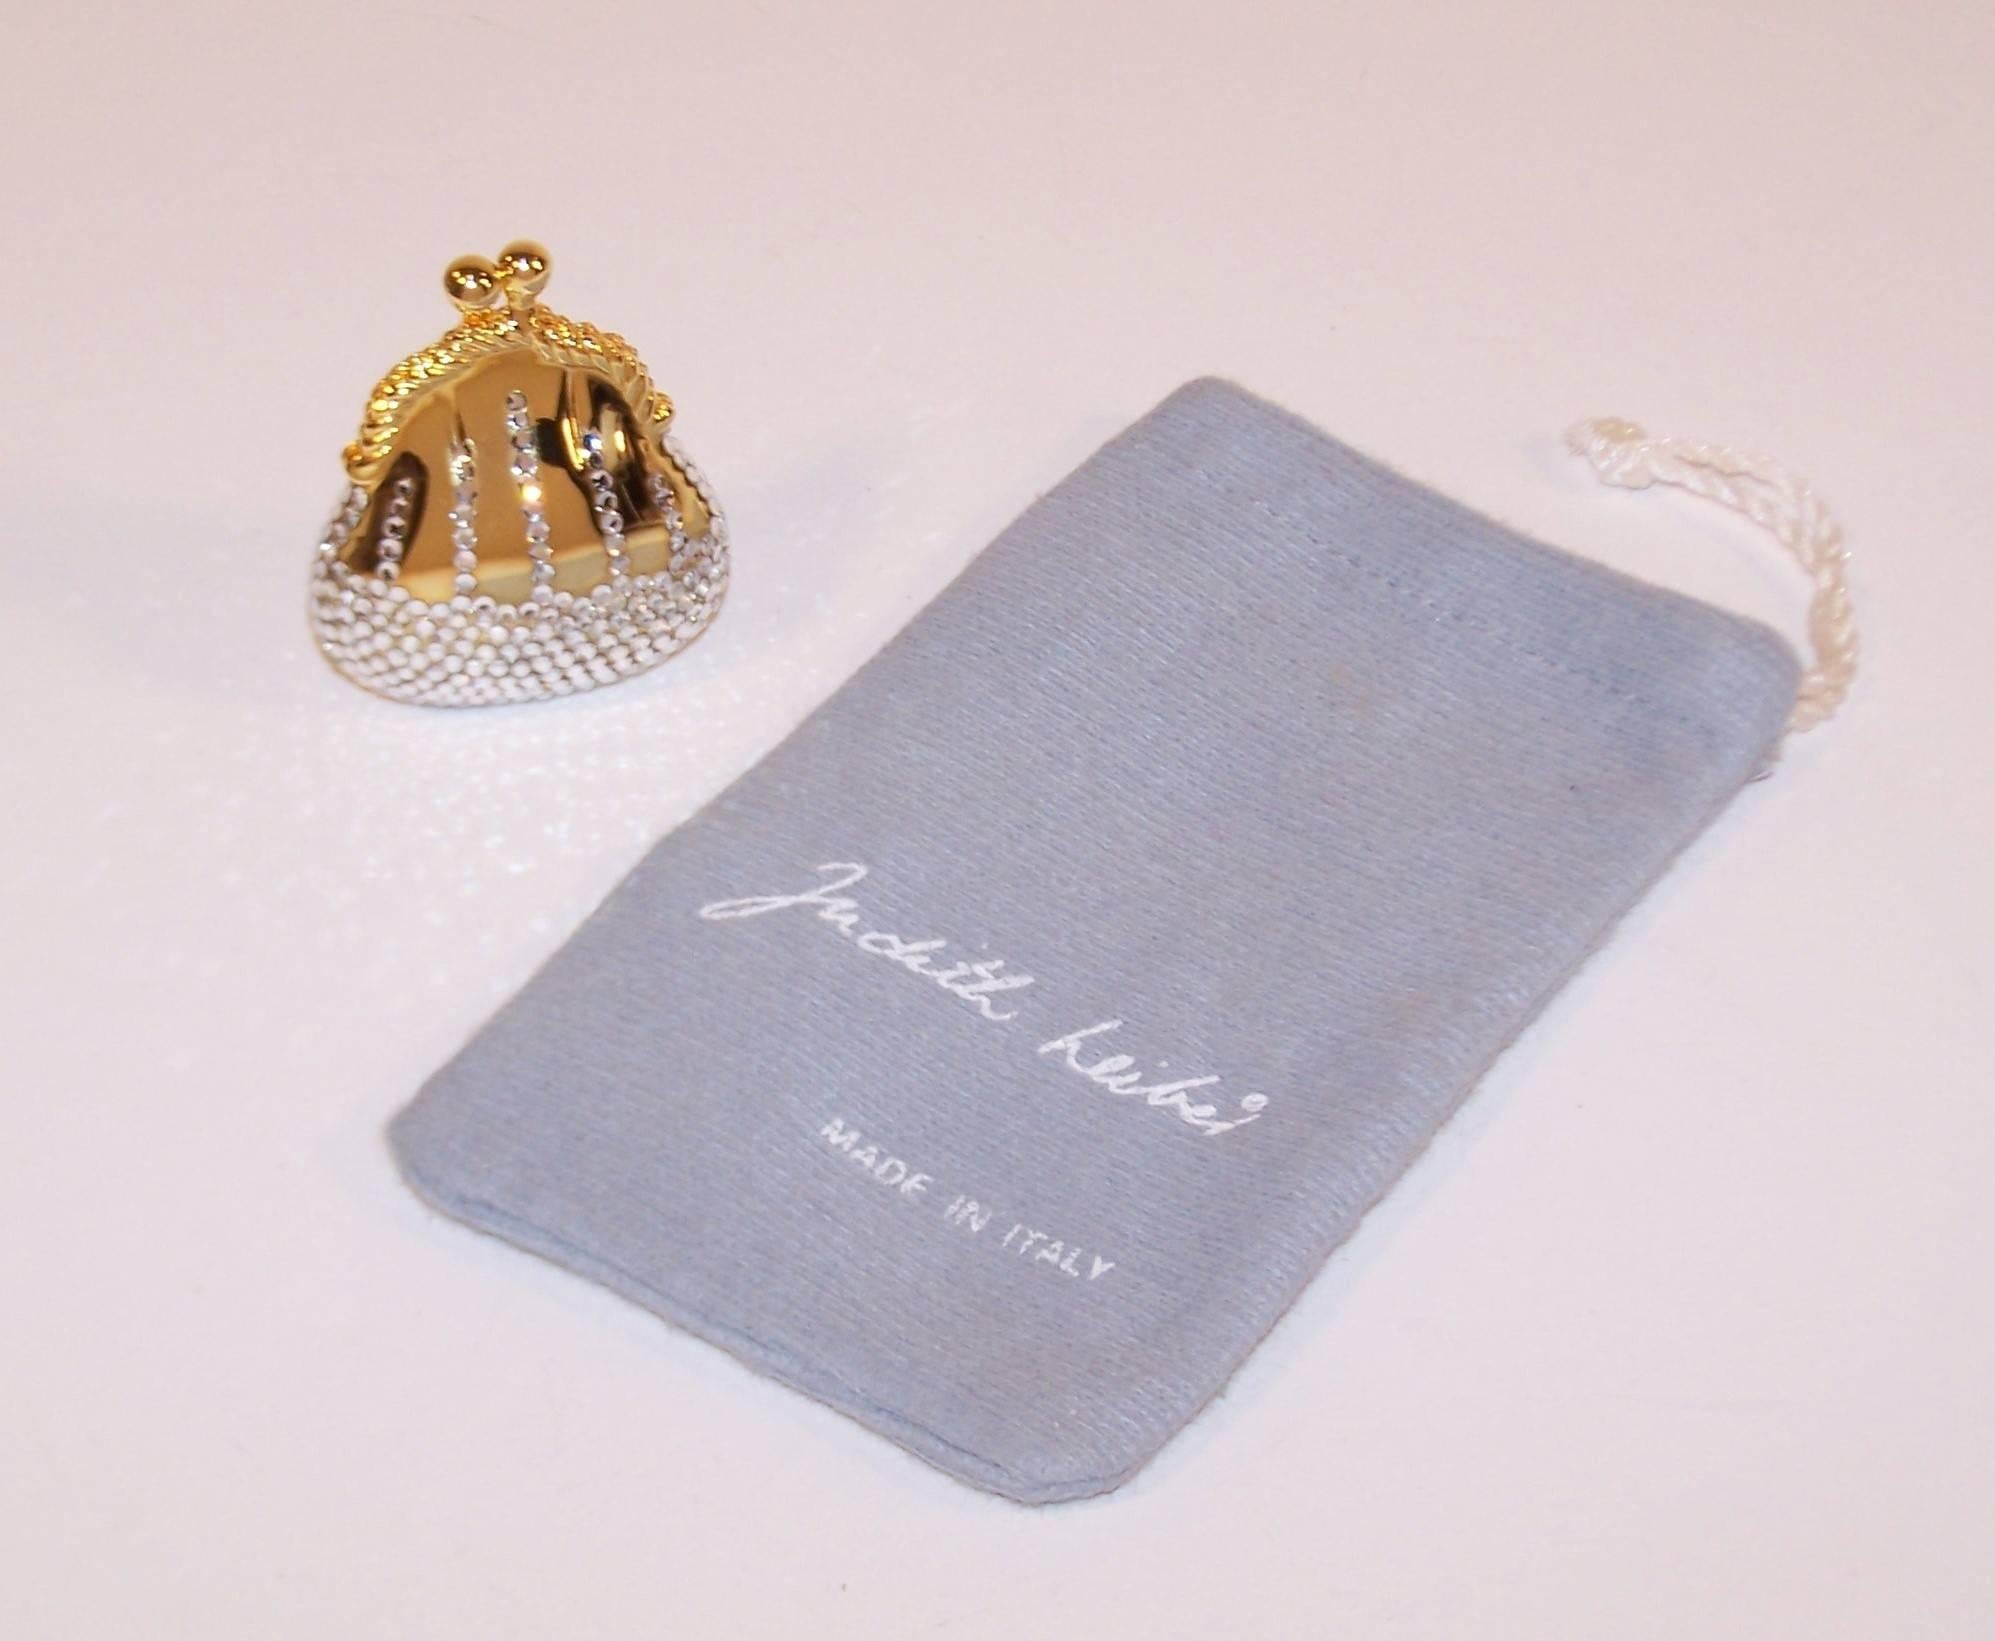 This precious bauble is masquerading as a fashion accessory.  Fully functional as a pillbox, the crystal encrusted money bag shaped pouch by Judith Leiber has a kiss lock closure and measures 2" x 1.63" x .75".  As with all Ms.